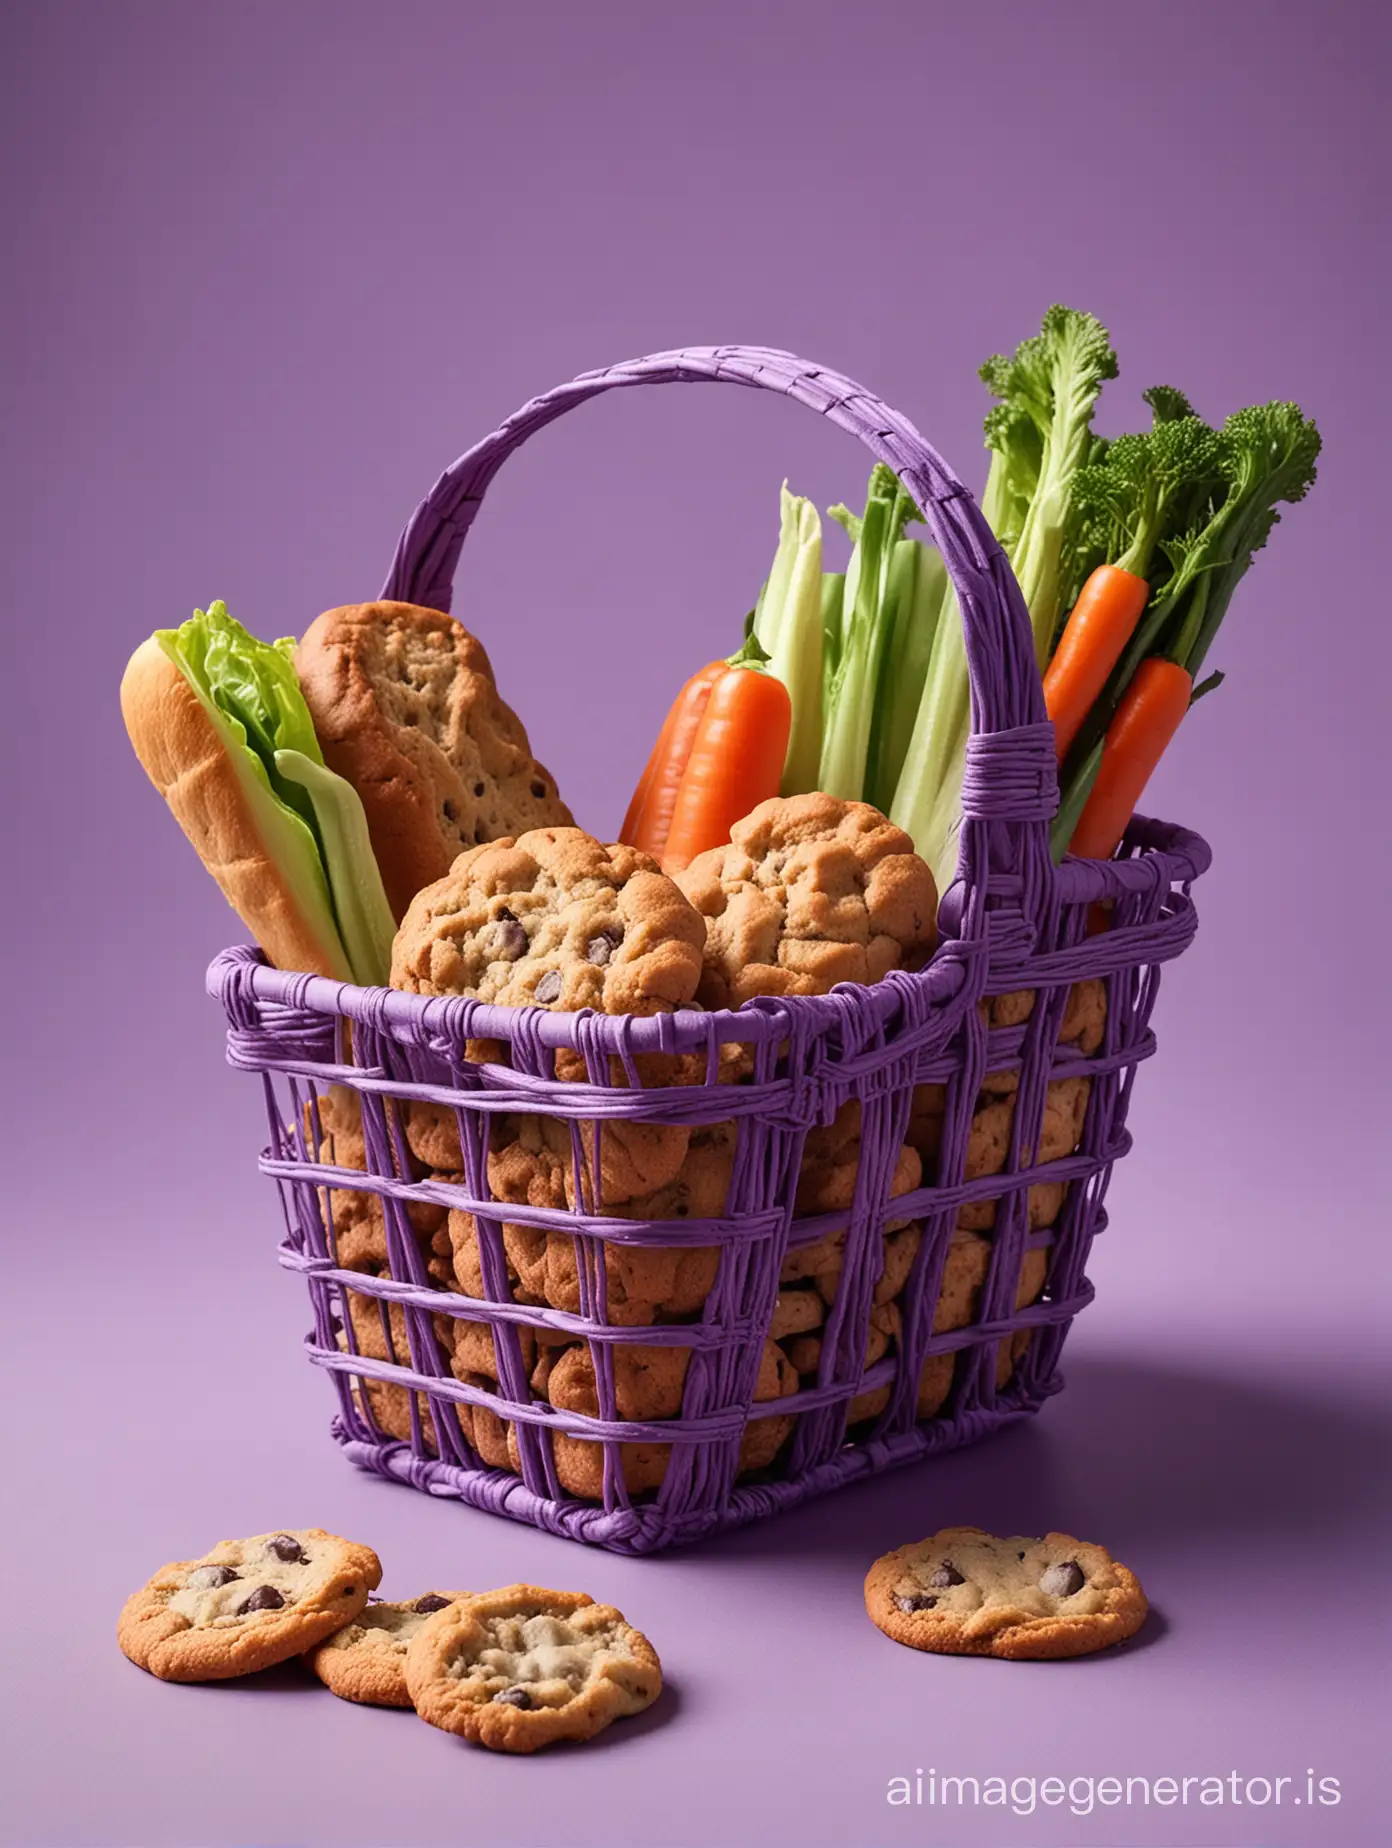 Freshly-Baked-Goods-and-Healthy-Veggies-in-a-Wicker-Basket-on-Gradient-Background